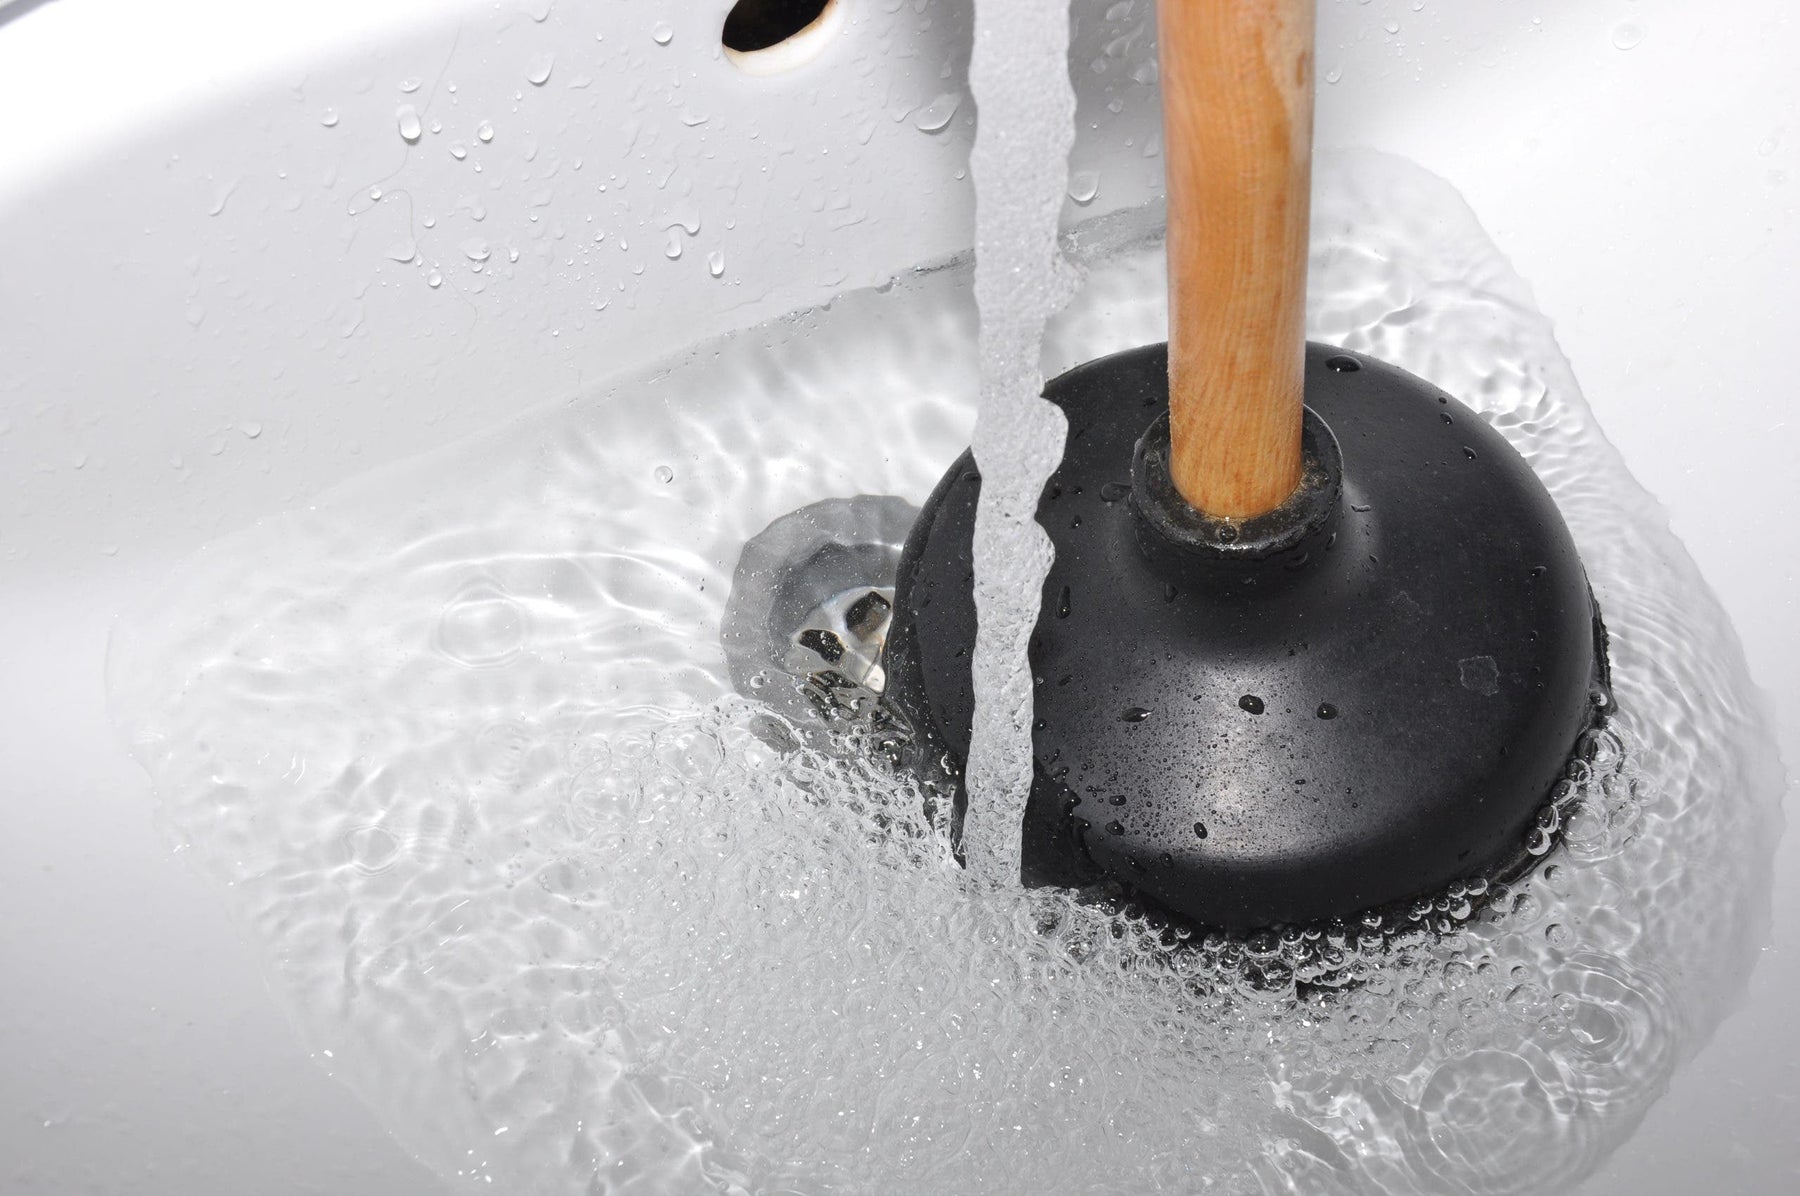 Home Remedies for a Clogged Sink